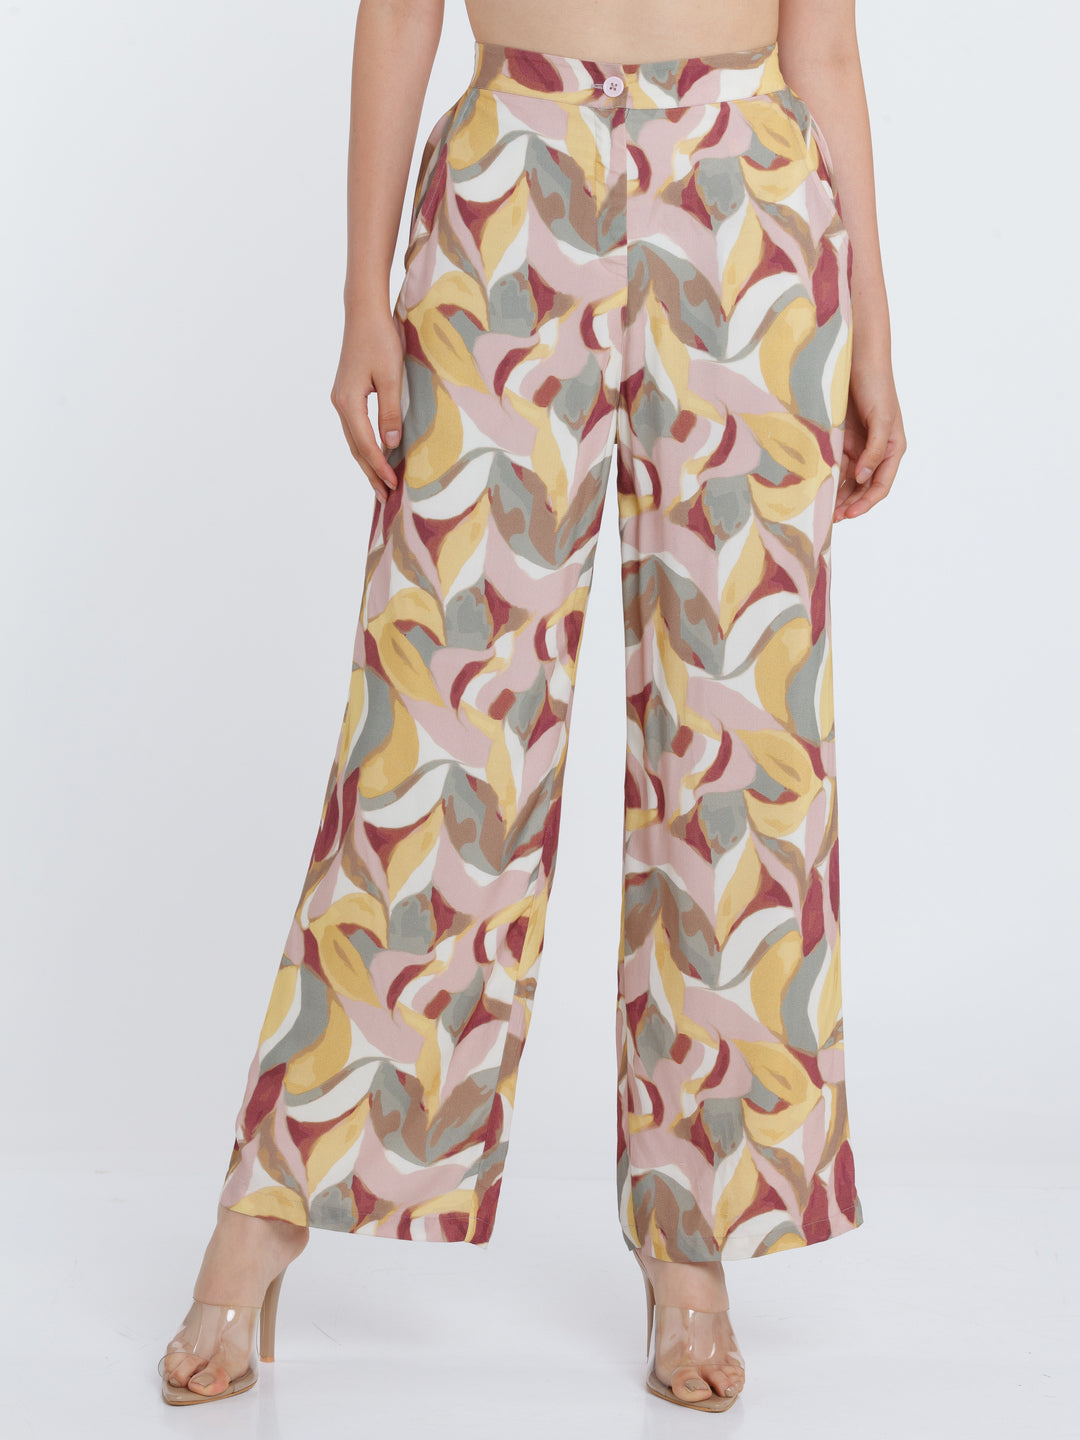 Multicolored Printed Elasticated Trouser For Women